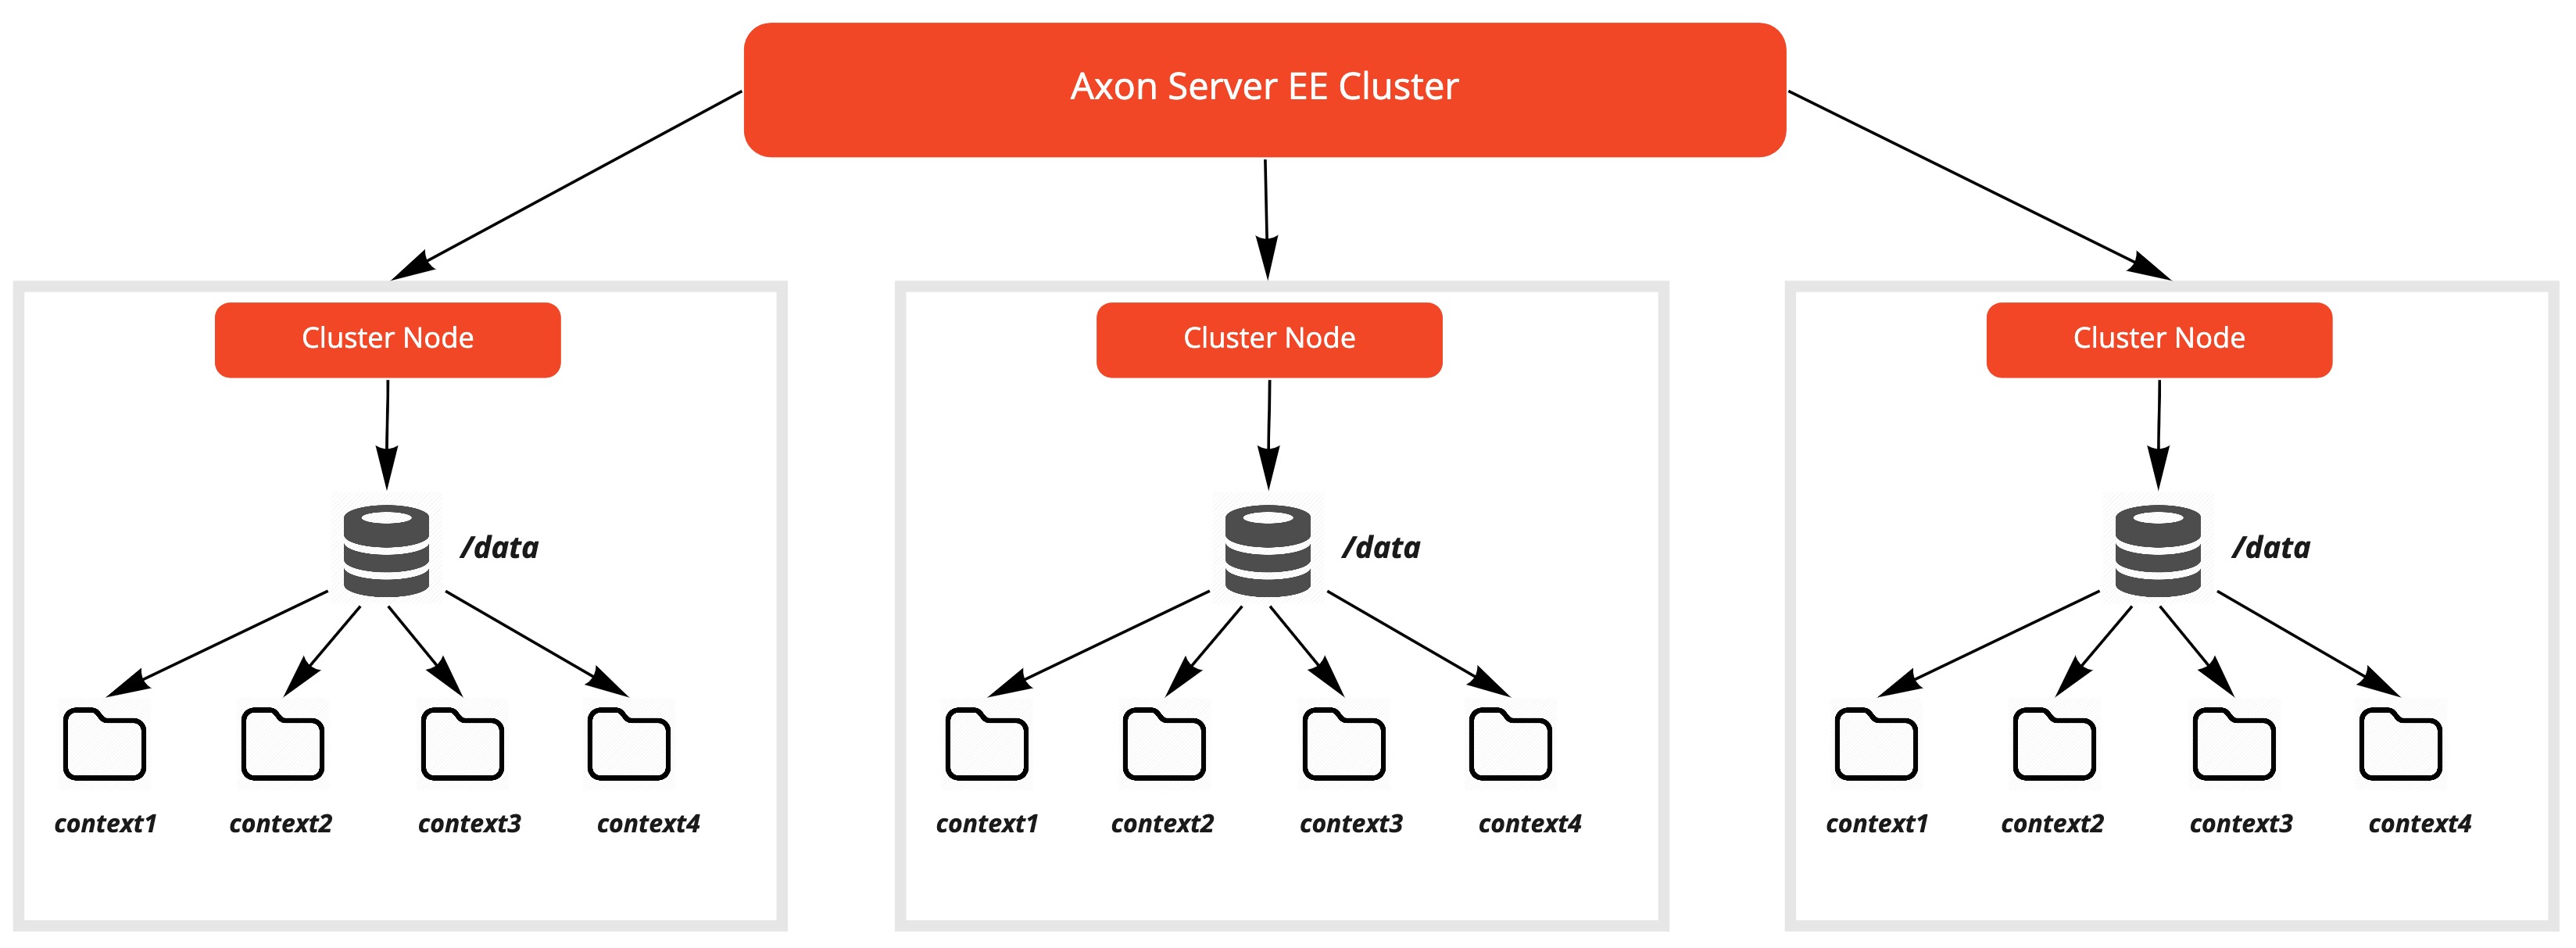 Multiple contexts within an Axon Server EE cluster